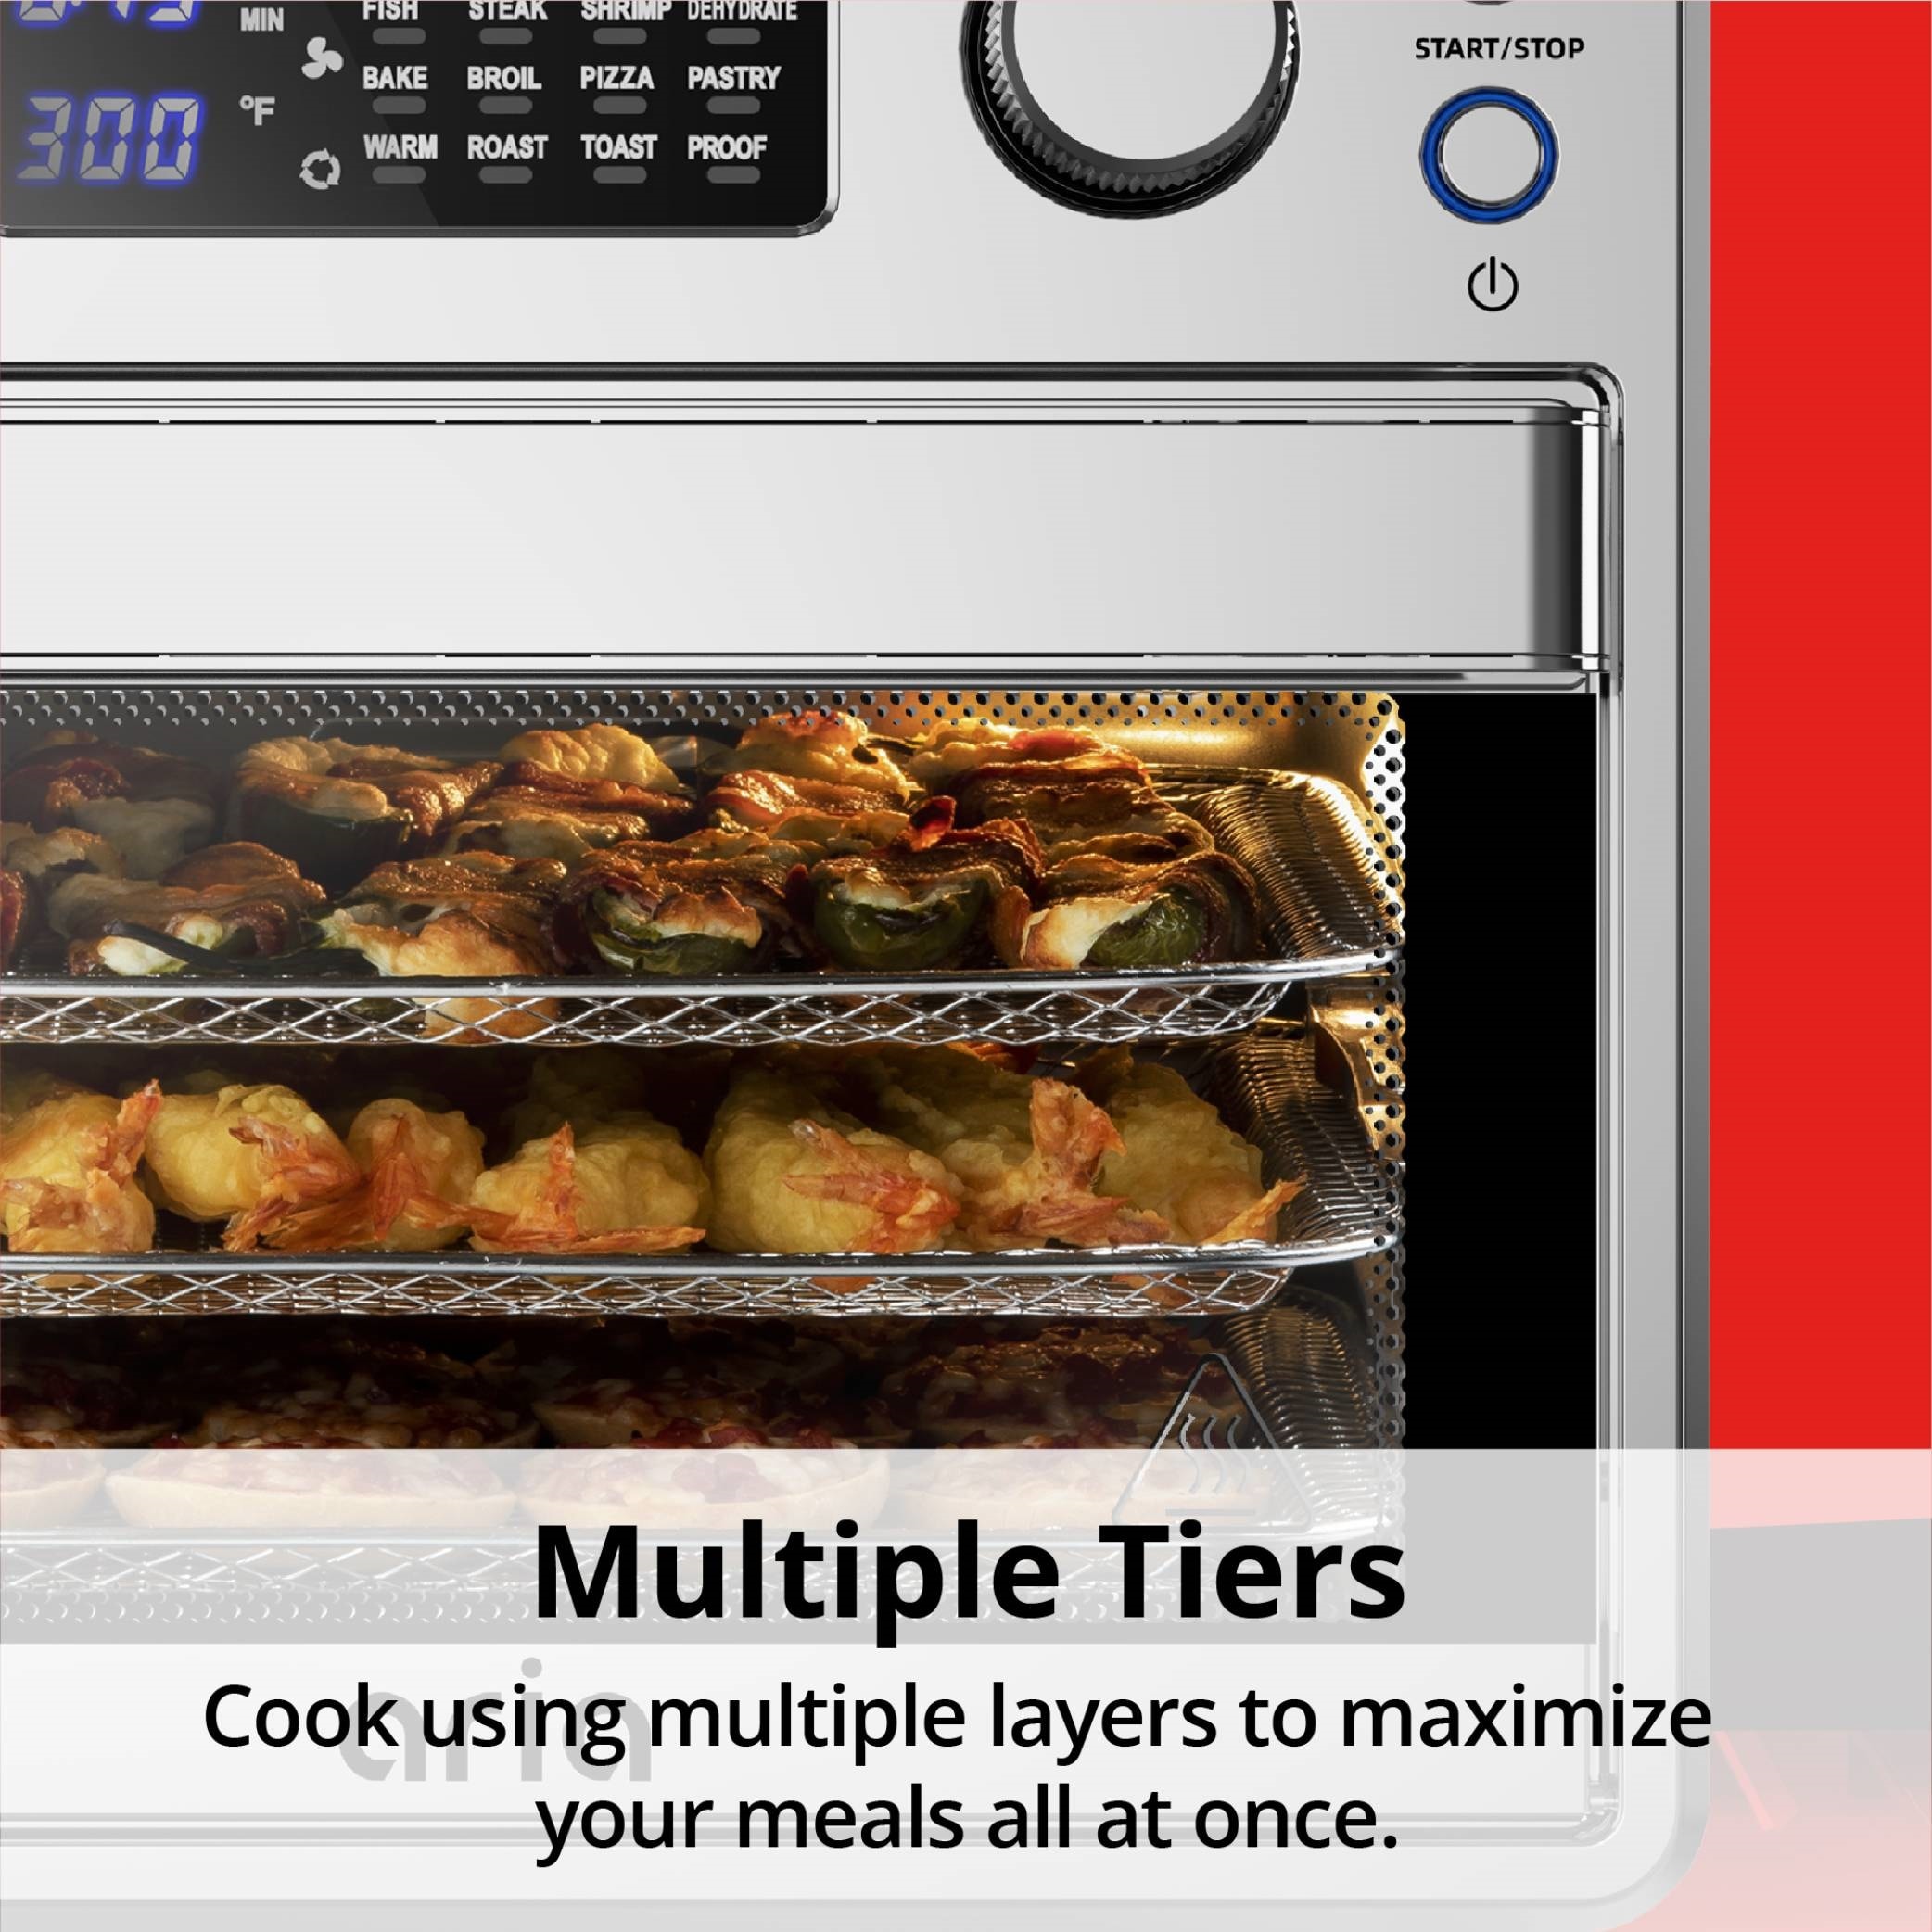 16 qt. Air Fryer Oven Ariawave Mini Stainless Steel with Rotating Rotisserie, Silver